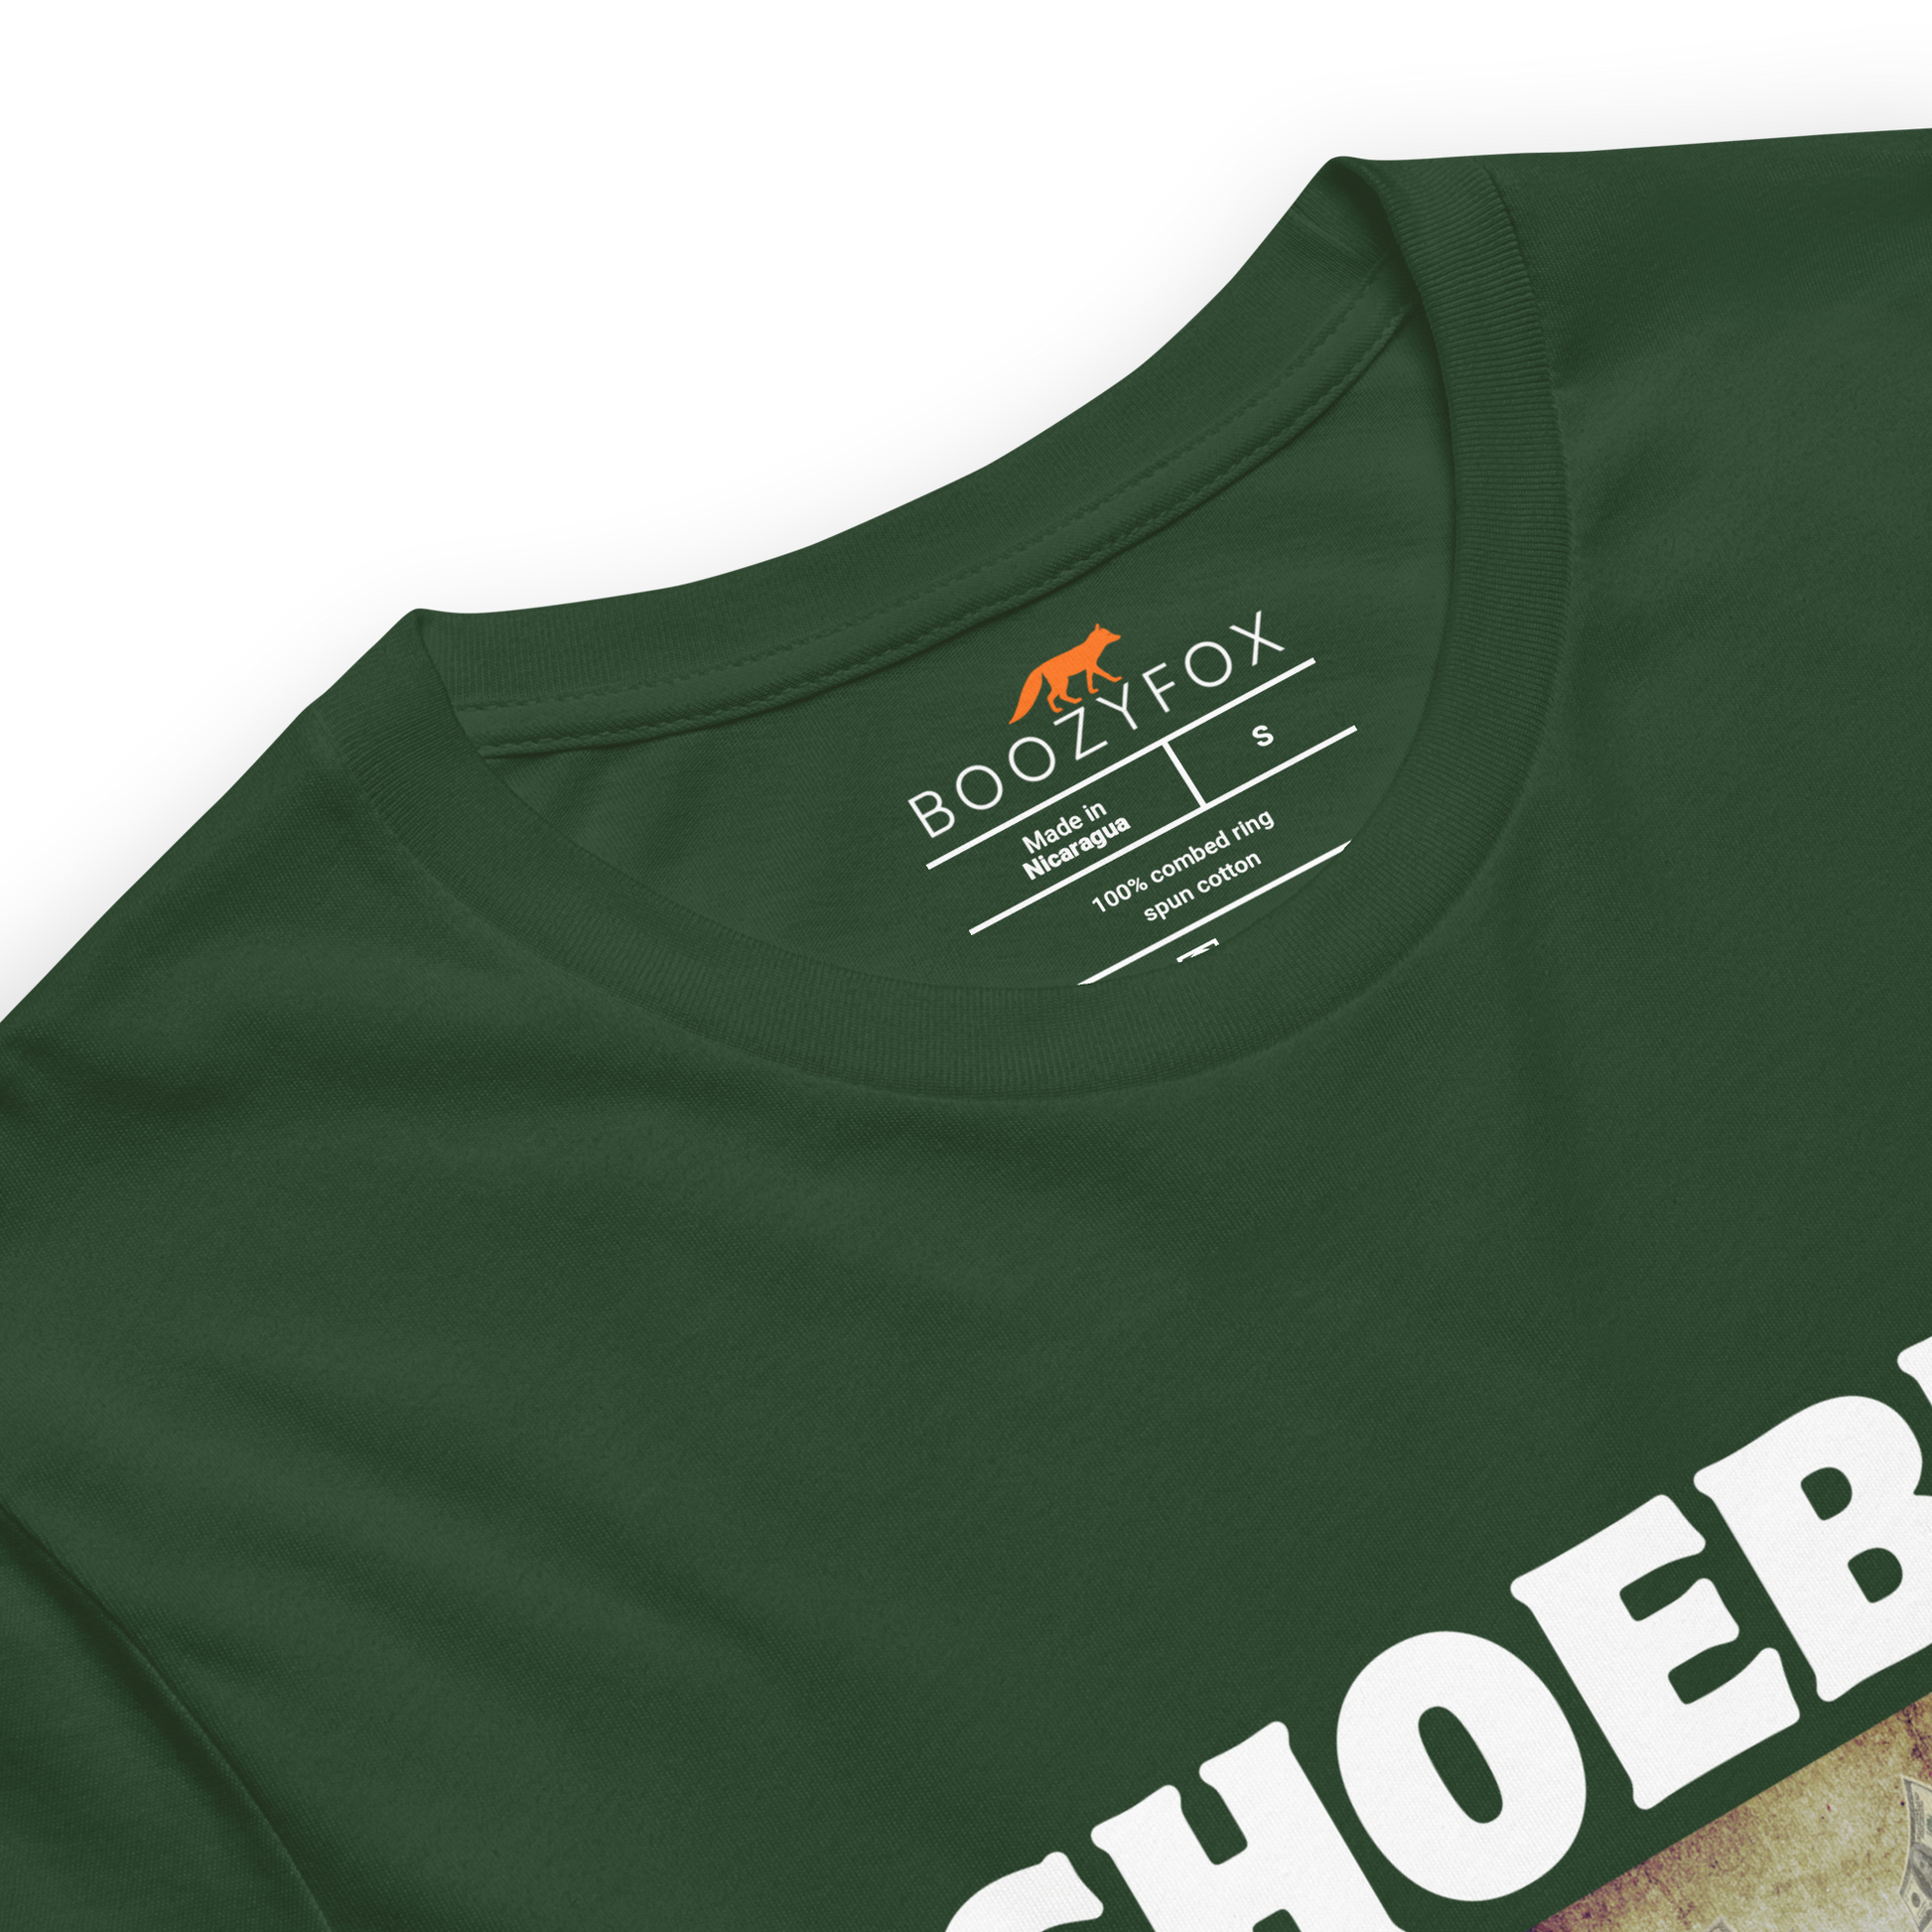 Product details of a Forest Green Premium Shoebill Tee featuring cool Shoebill graphic on the chest - Artsy/Funny Graphic Shoebill Stork Tees - Boozy Fox